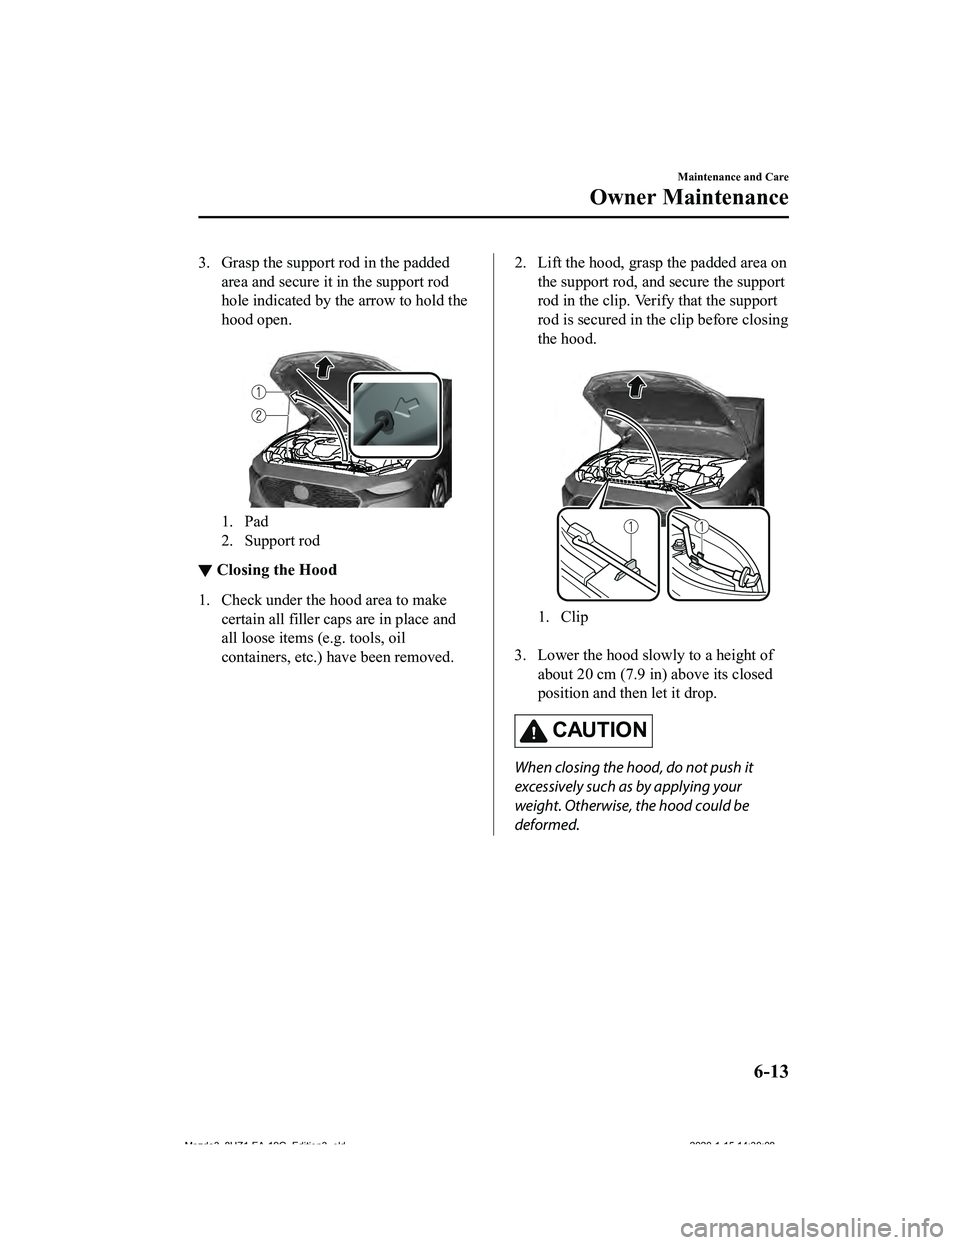 MAZDA MODEL 3-SEDAN 2020  Owners Manual 3. Grasp the support rod in the paddedarea and secure it in the support rod
hole indicated by the arrow to hold the
hood open.
 
1. Pad
2. Support rod
▼Closing the Hood
1. Check under the hood area 